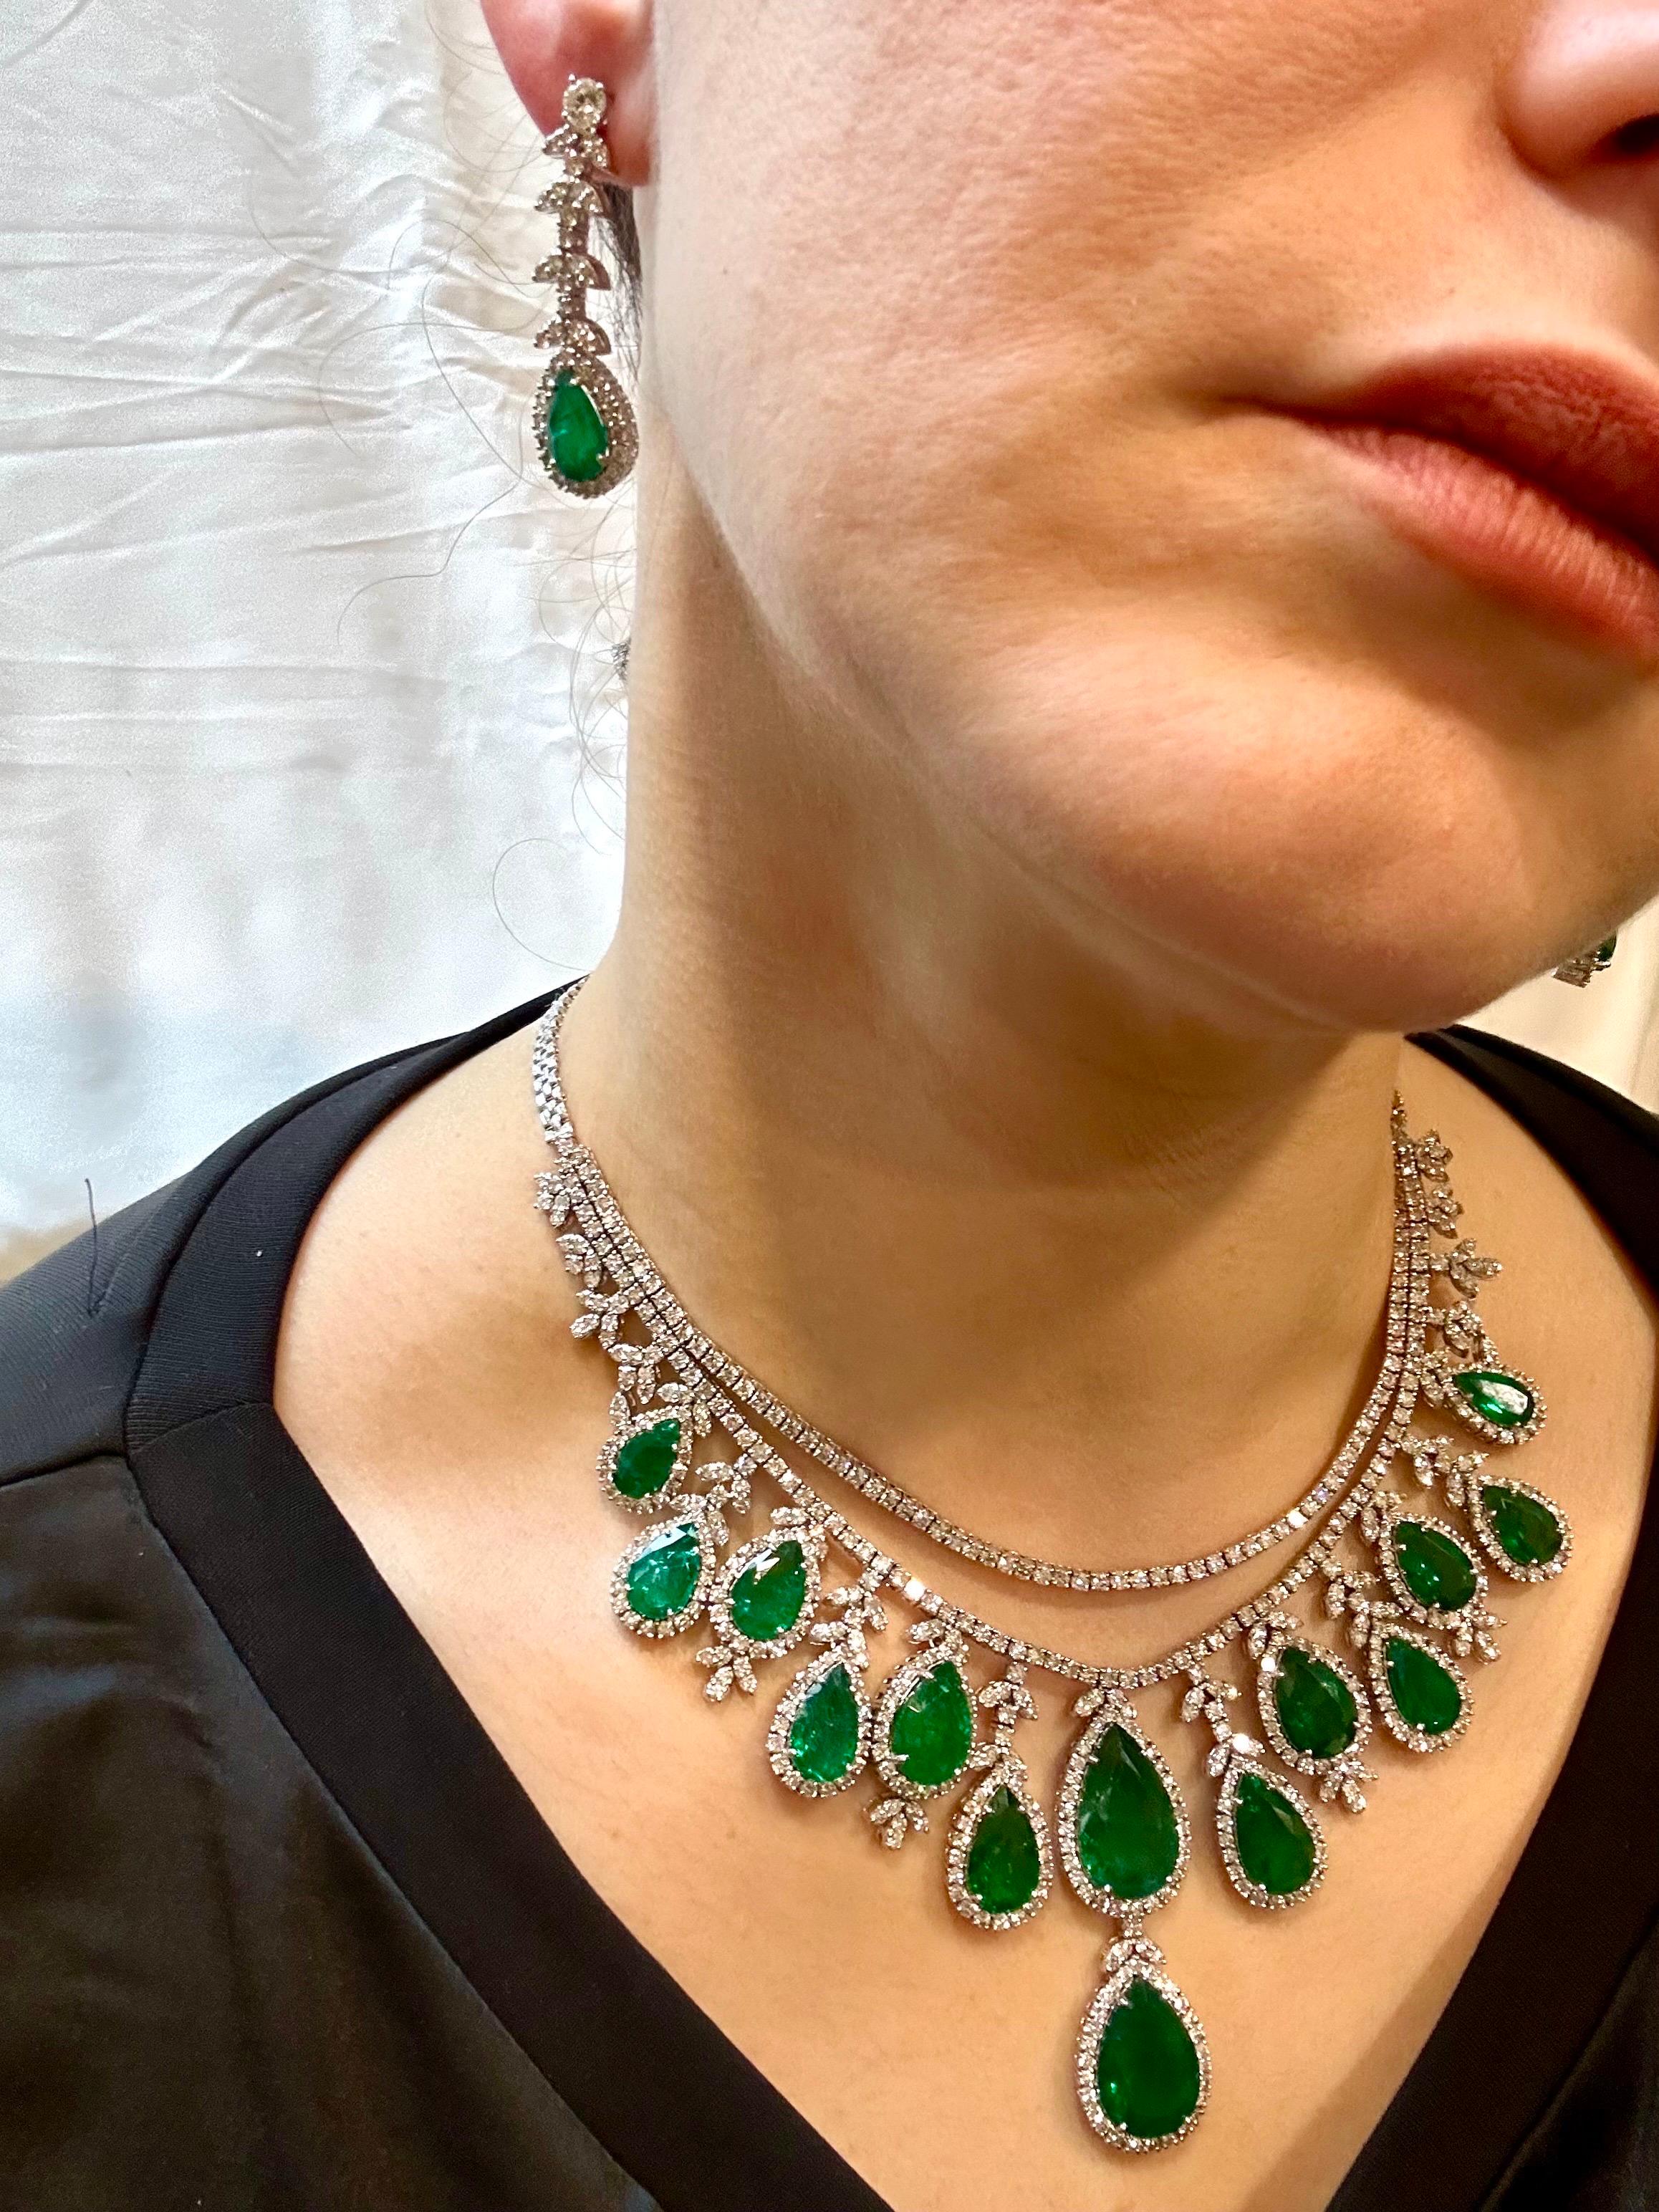 75 Ct Zambian Emerald and 30 Ct Diamond Necklace and Earring Bridal Suite For Sale 8